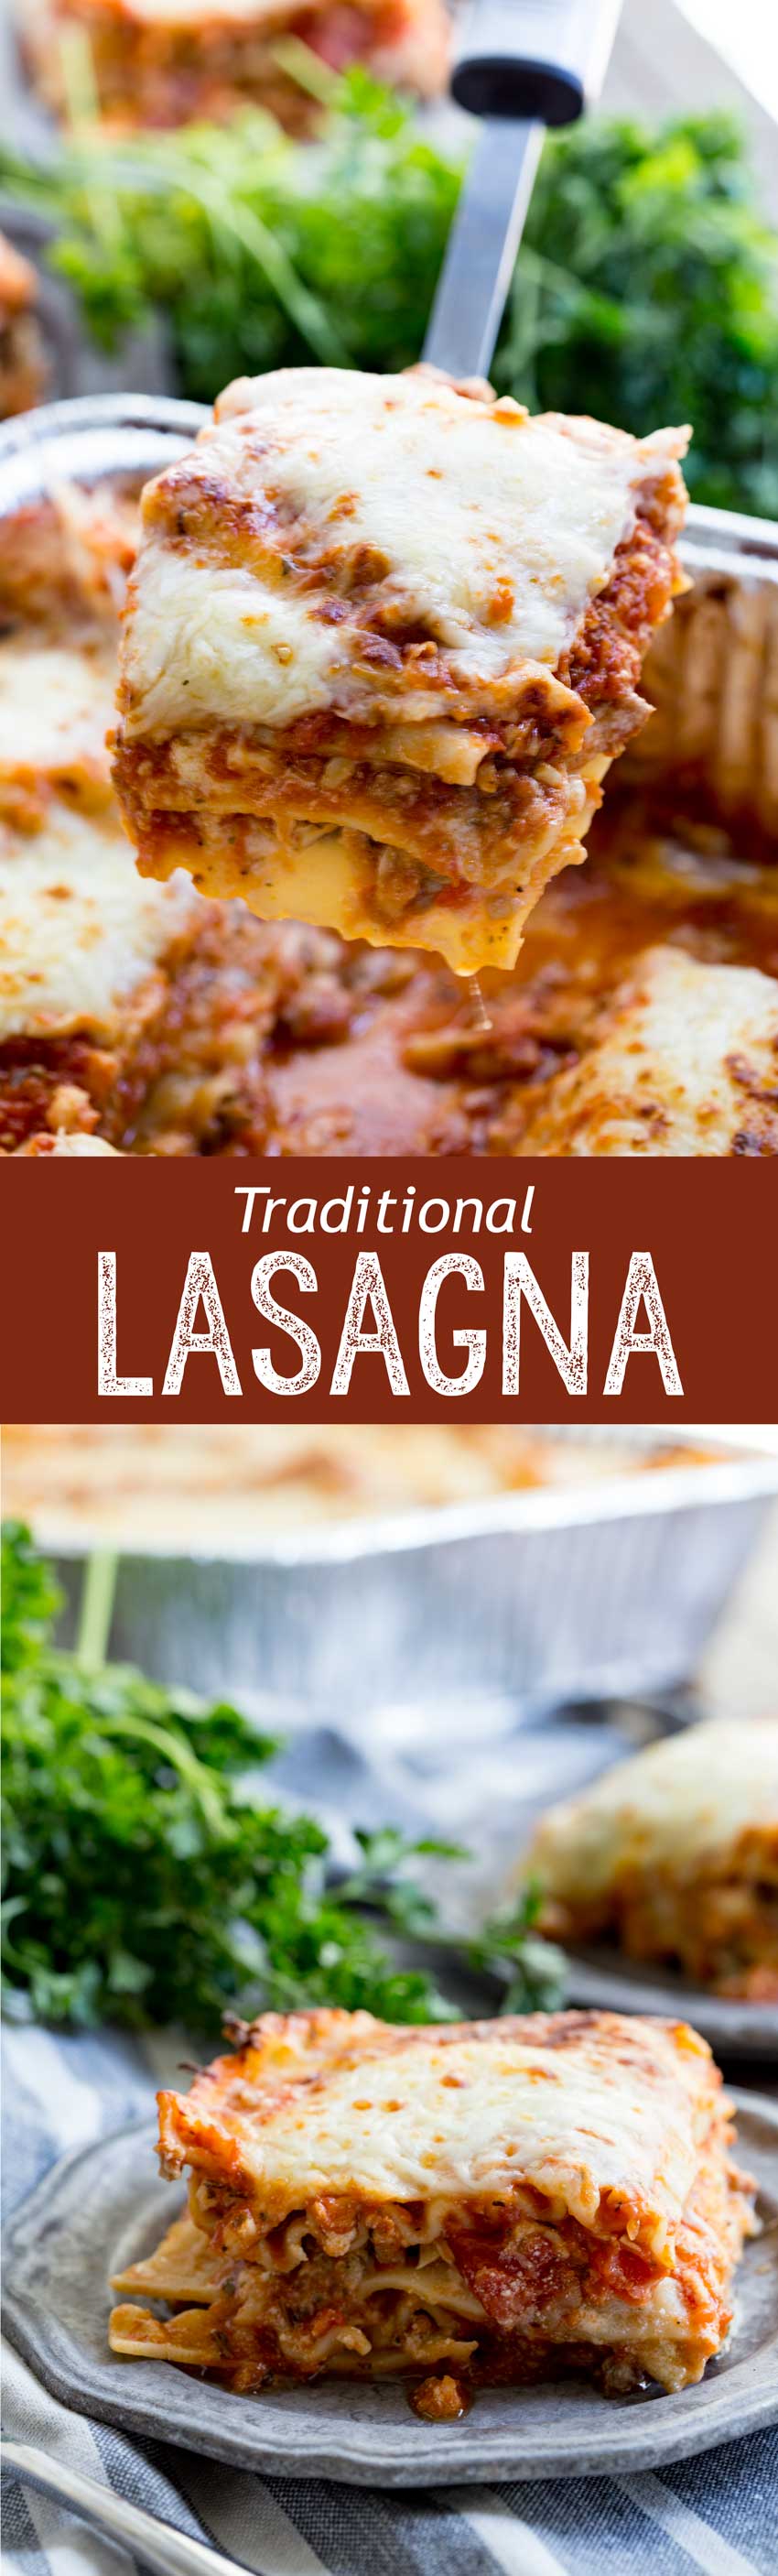 Meaty, hearty, and delicious, this traditional lasagna recipe is the perfect dinner solution